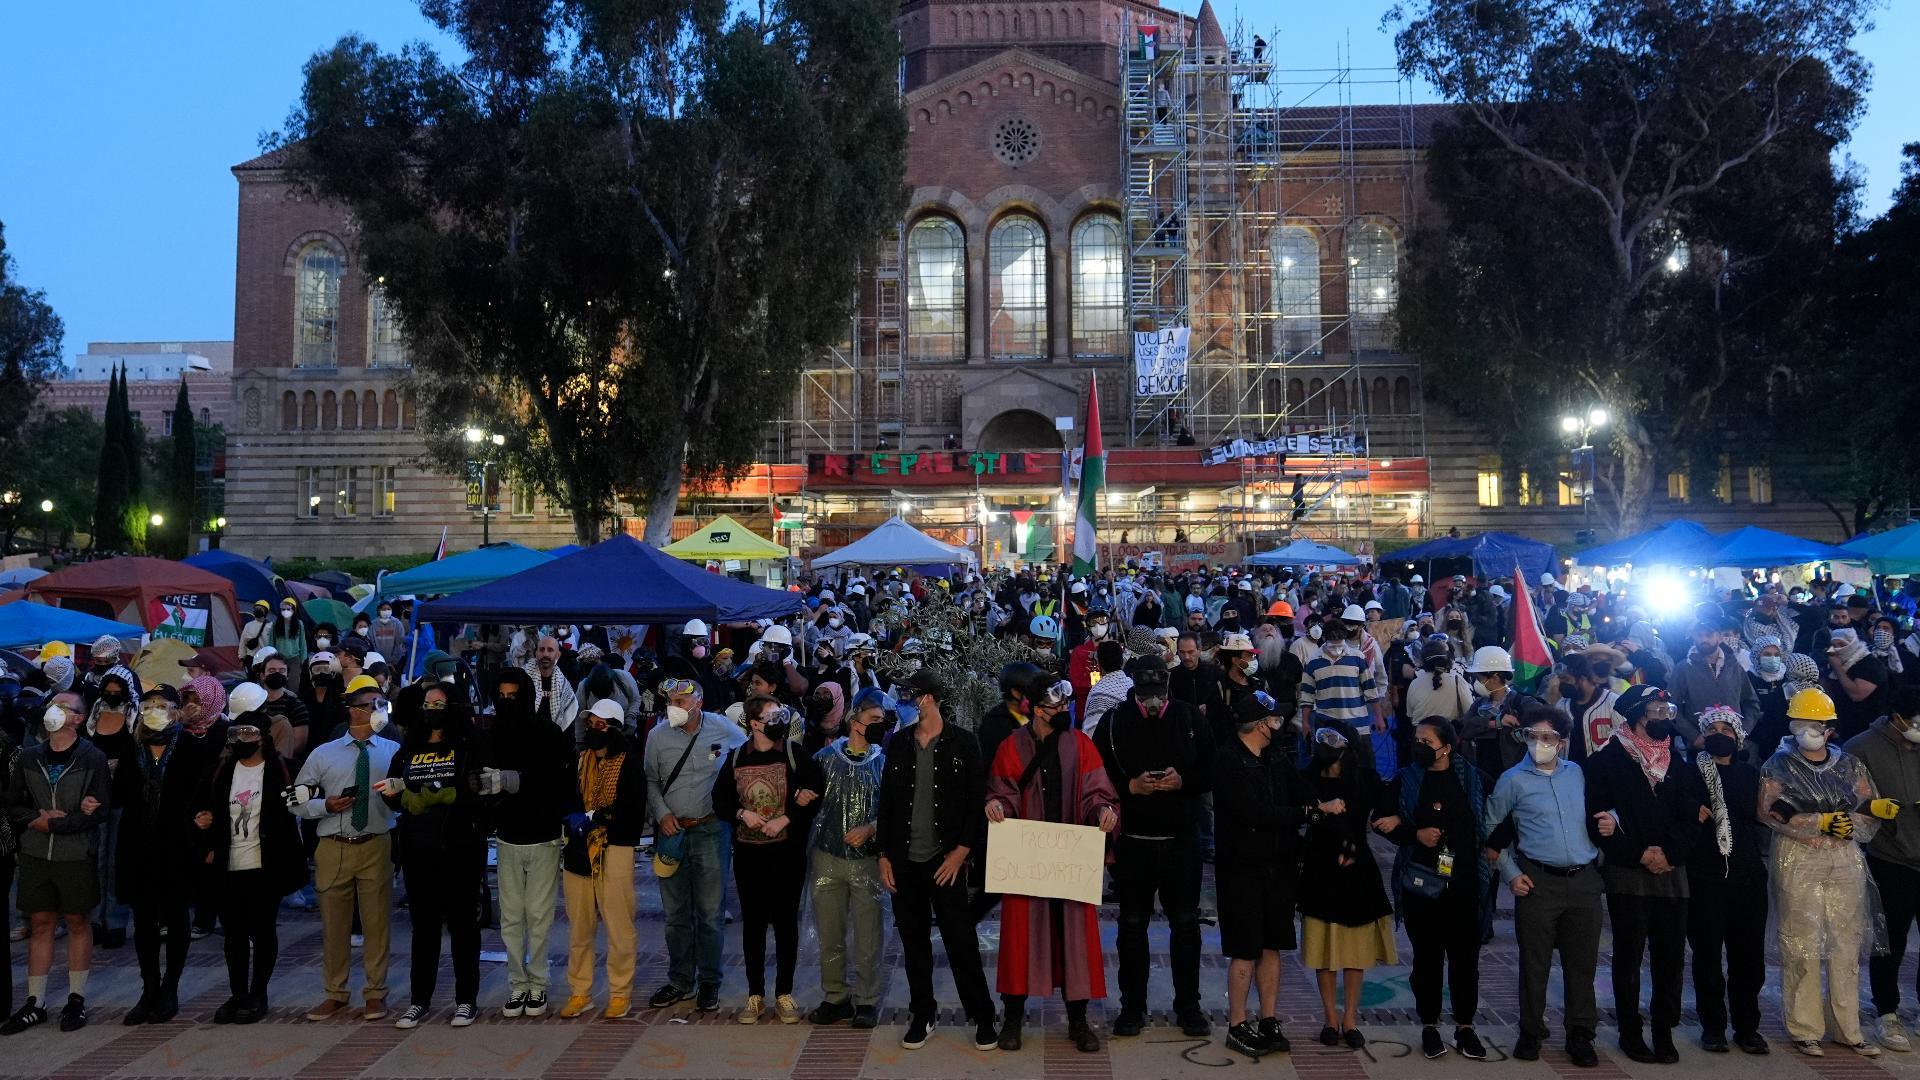 Police moved on the UCLA encampment early Thursday, tearing down barriers and using flash bangs as they advanced in the protesters.